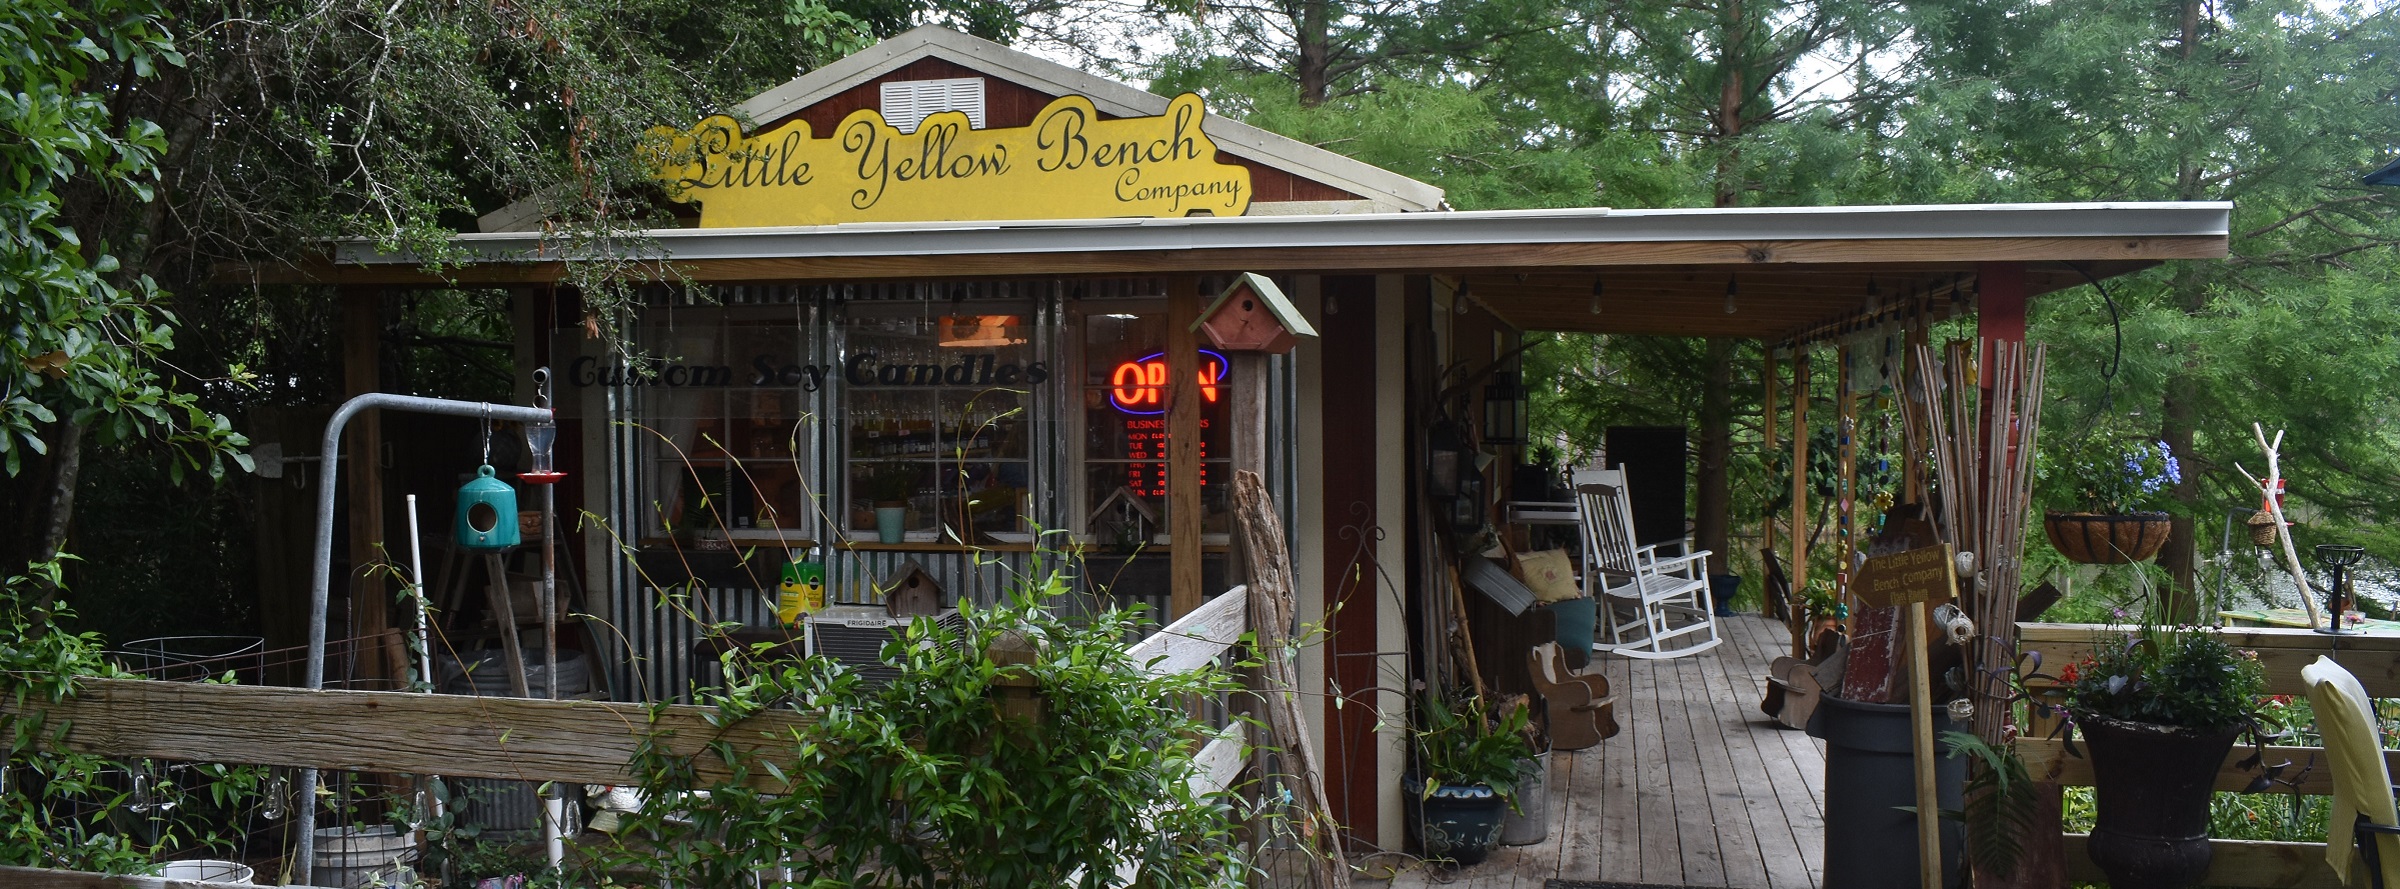 The Little Yellow Bench Company